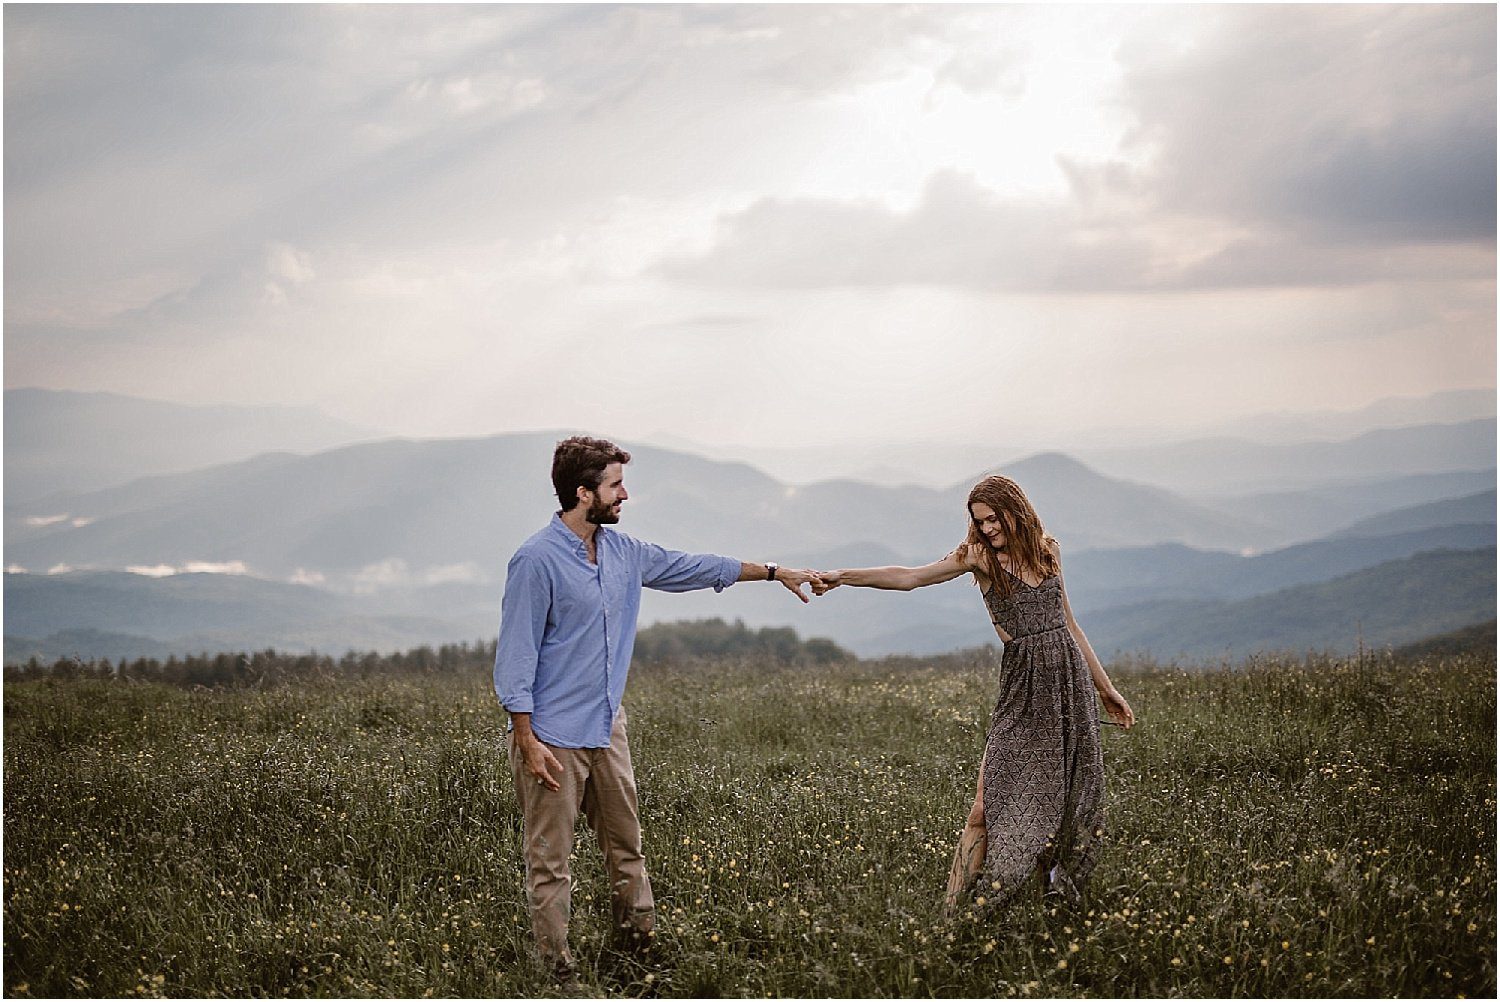 Max Patch Engagement Photos by Erin Morrison Photography